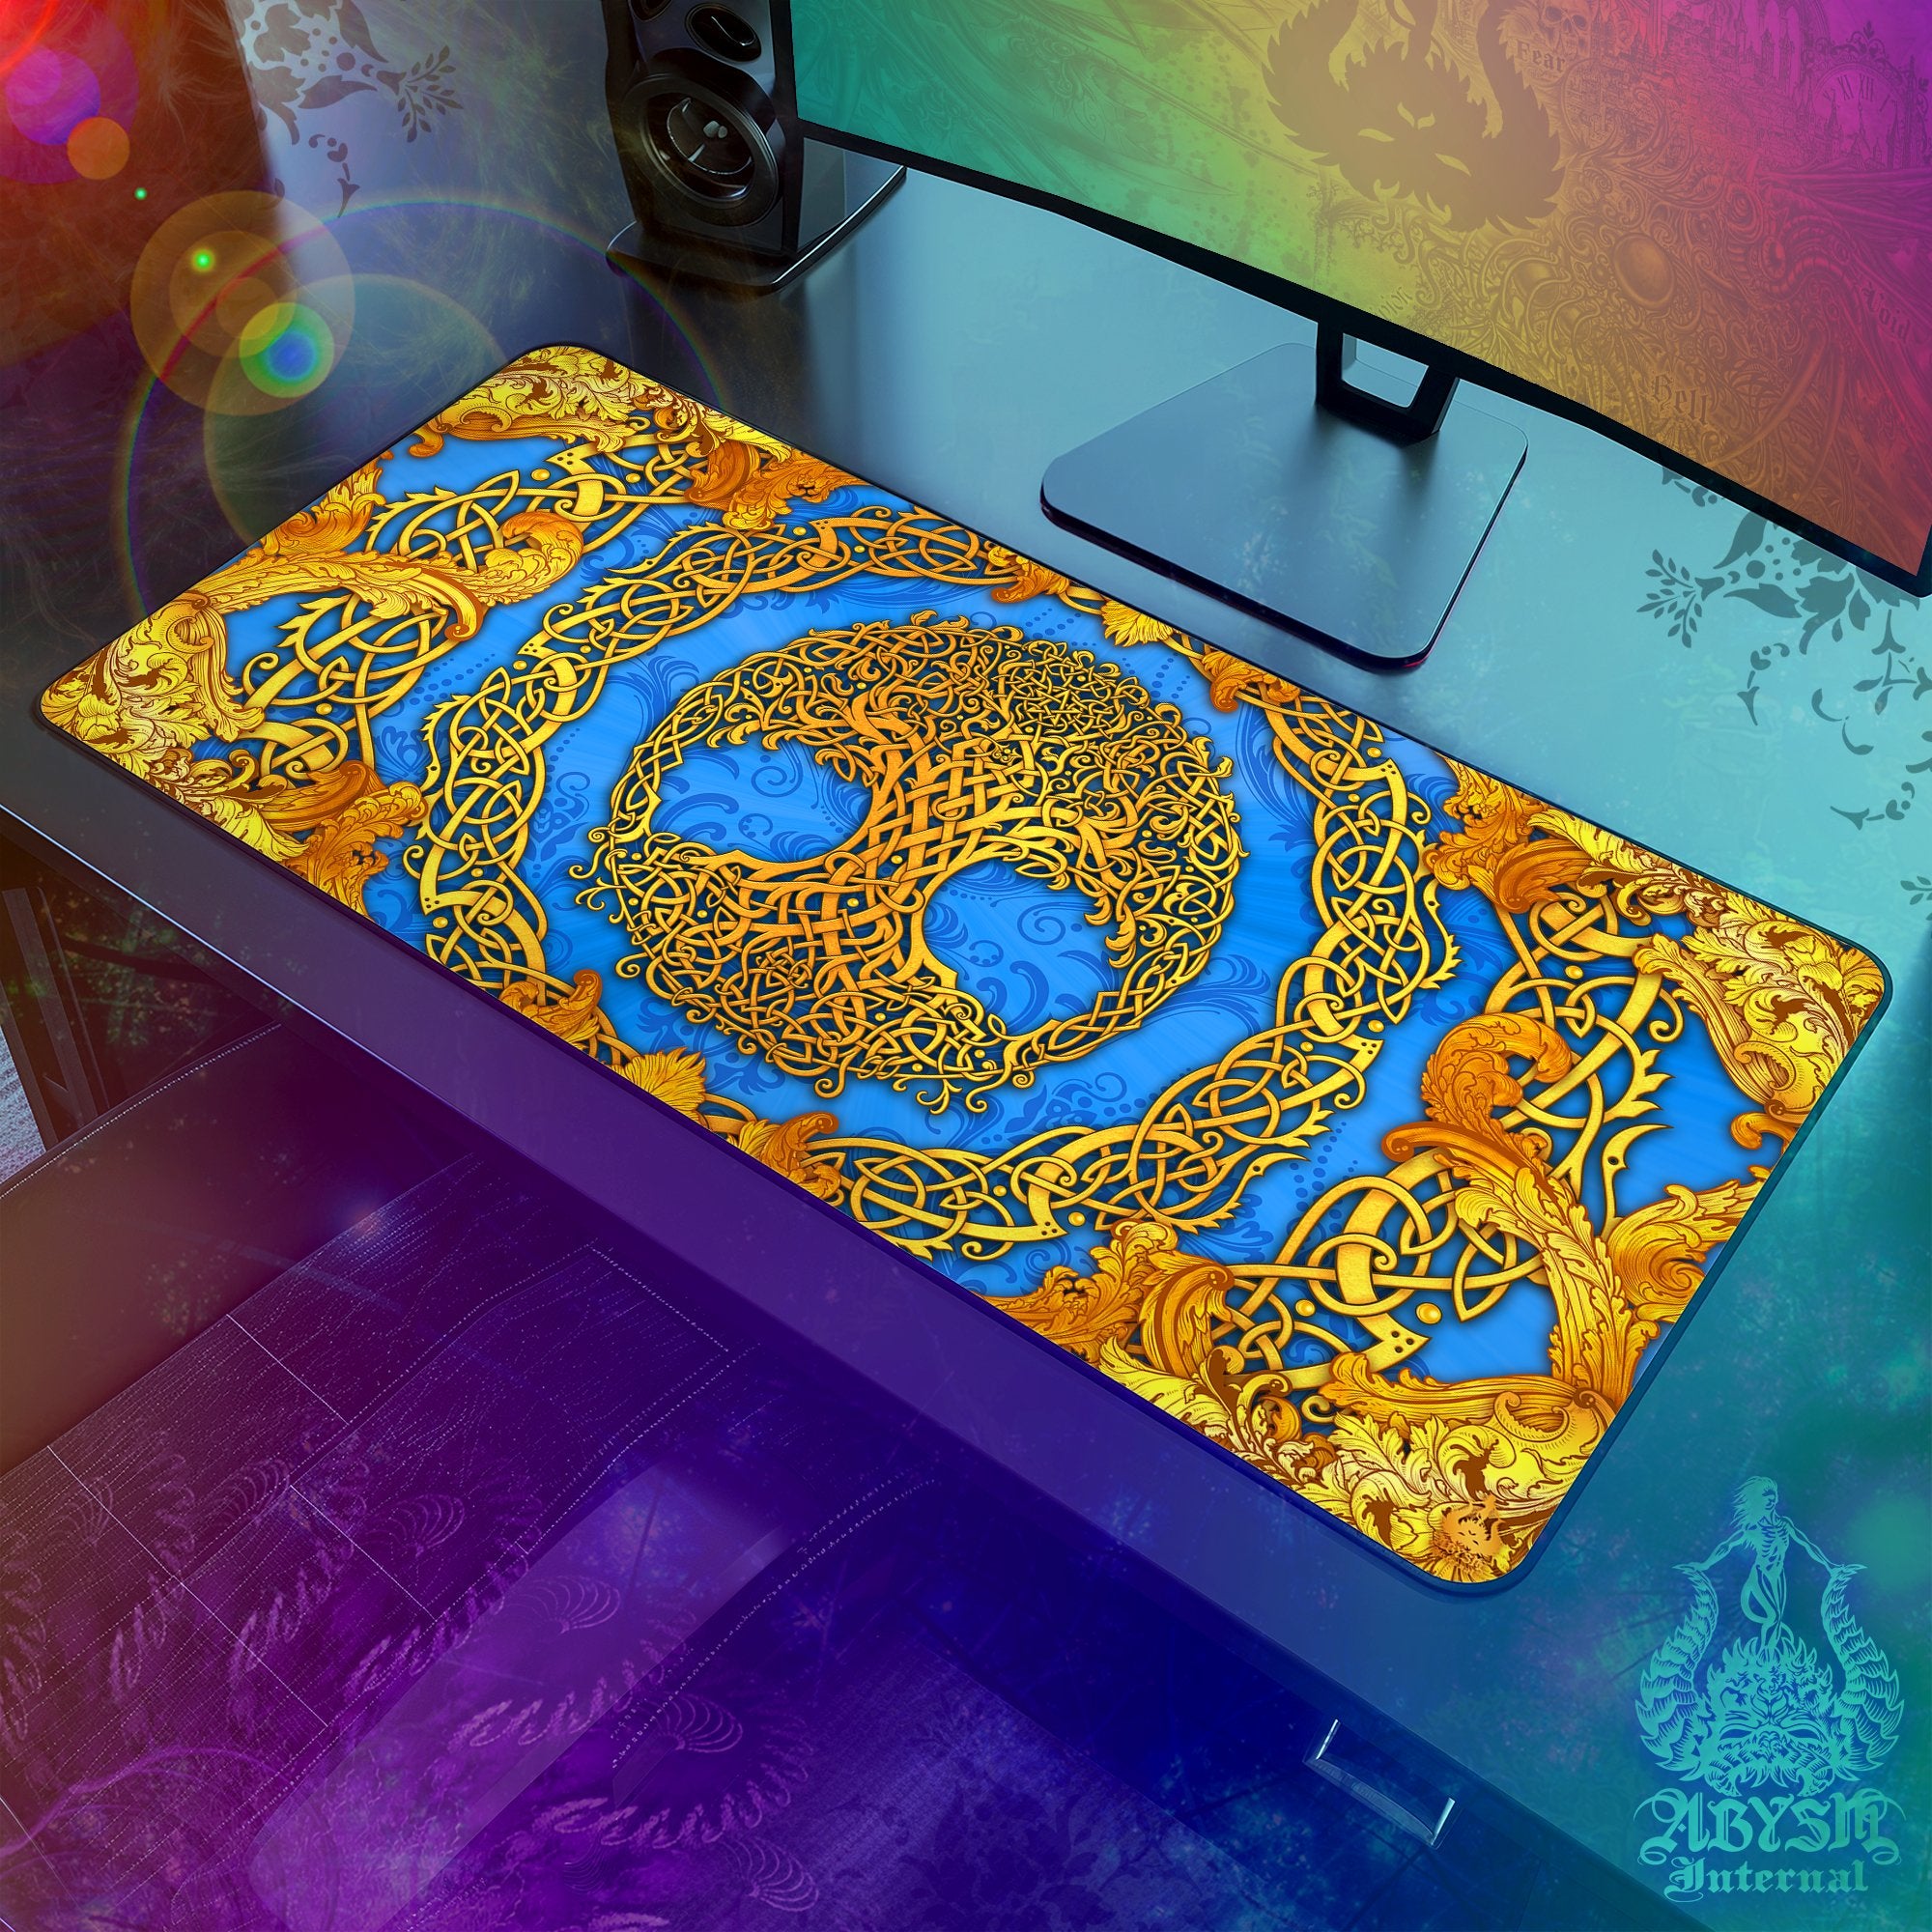 Wicca Desk Mat, Tree of Life Gaming Mouse Pad, Celtic Knotwork Table Protector Cover, Indie Workpad, Boho Art Print - Cyan Gold - Abysm Internal